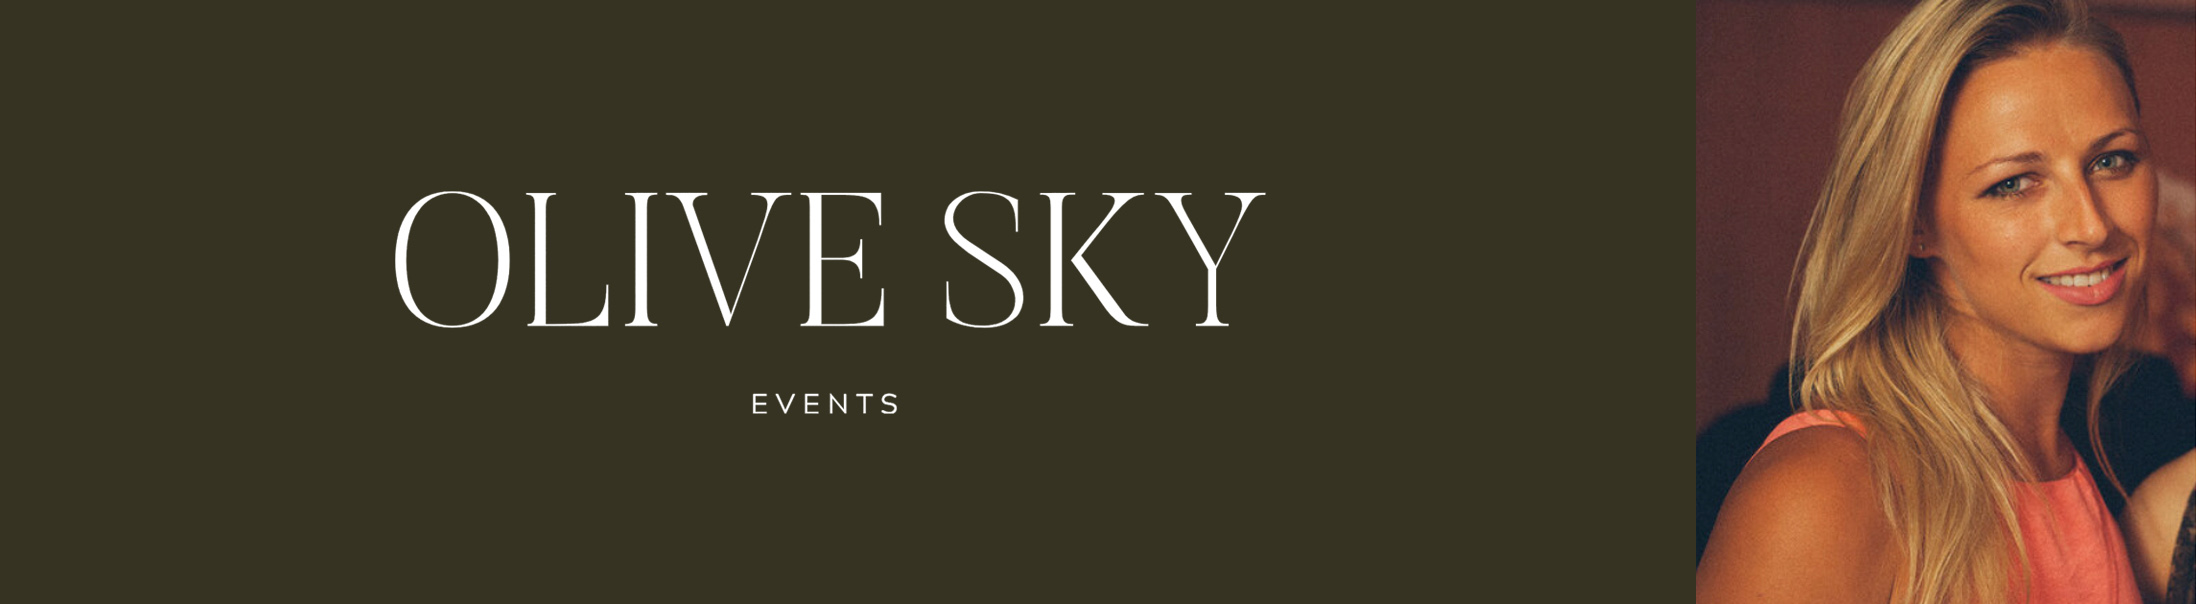 Top UK Wedding Planners - Olive Sky Events